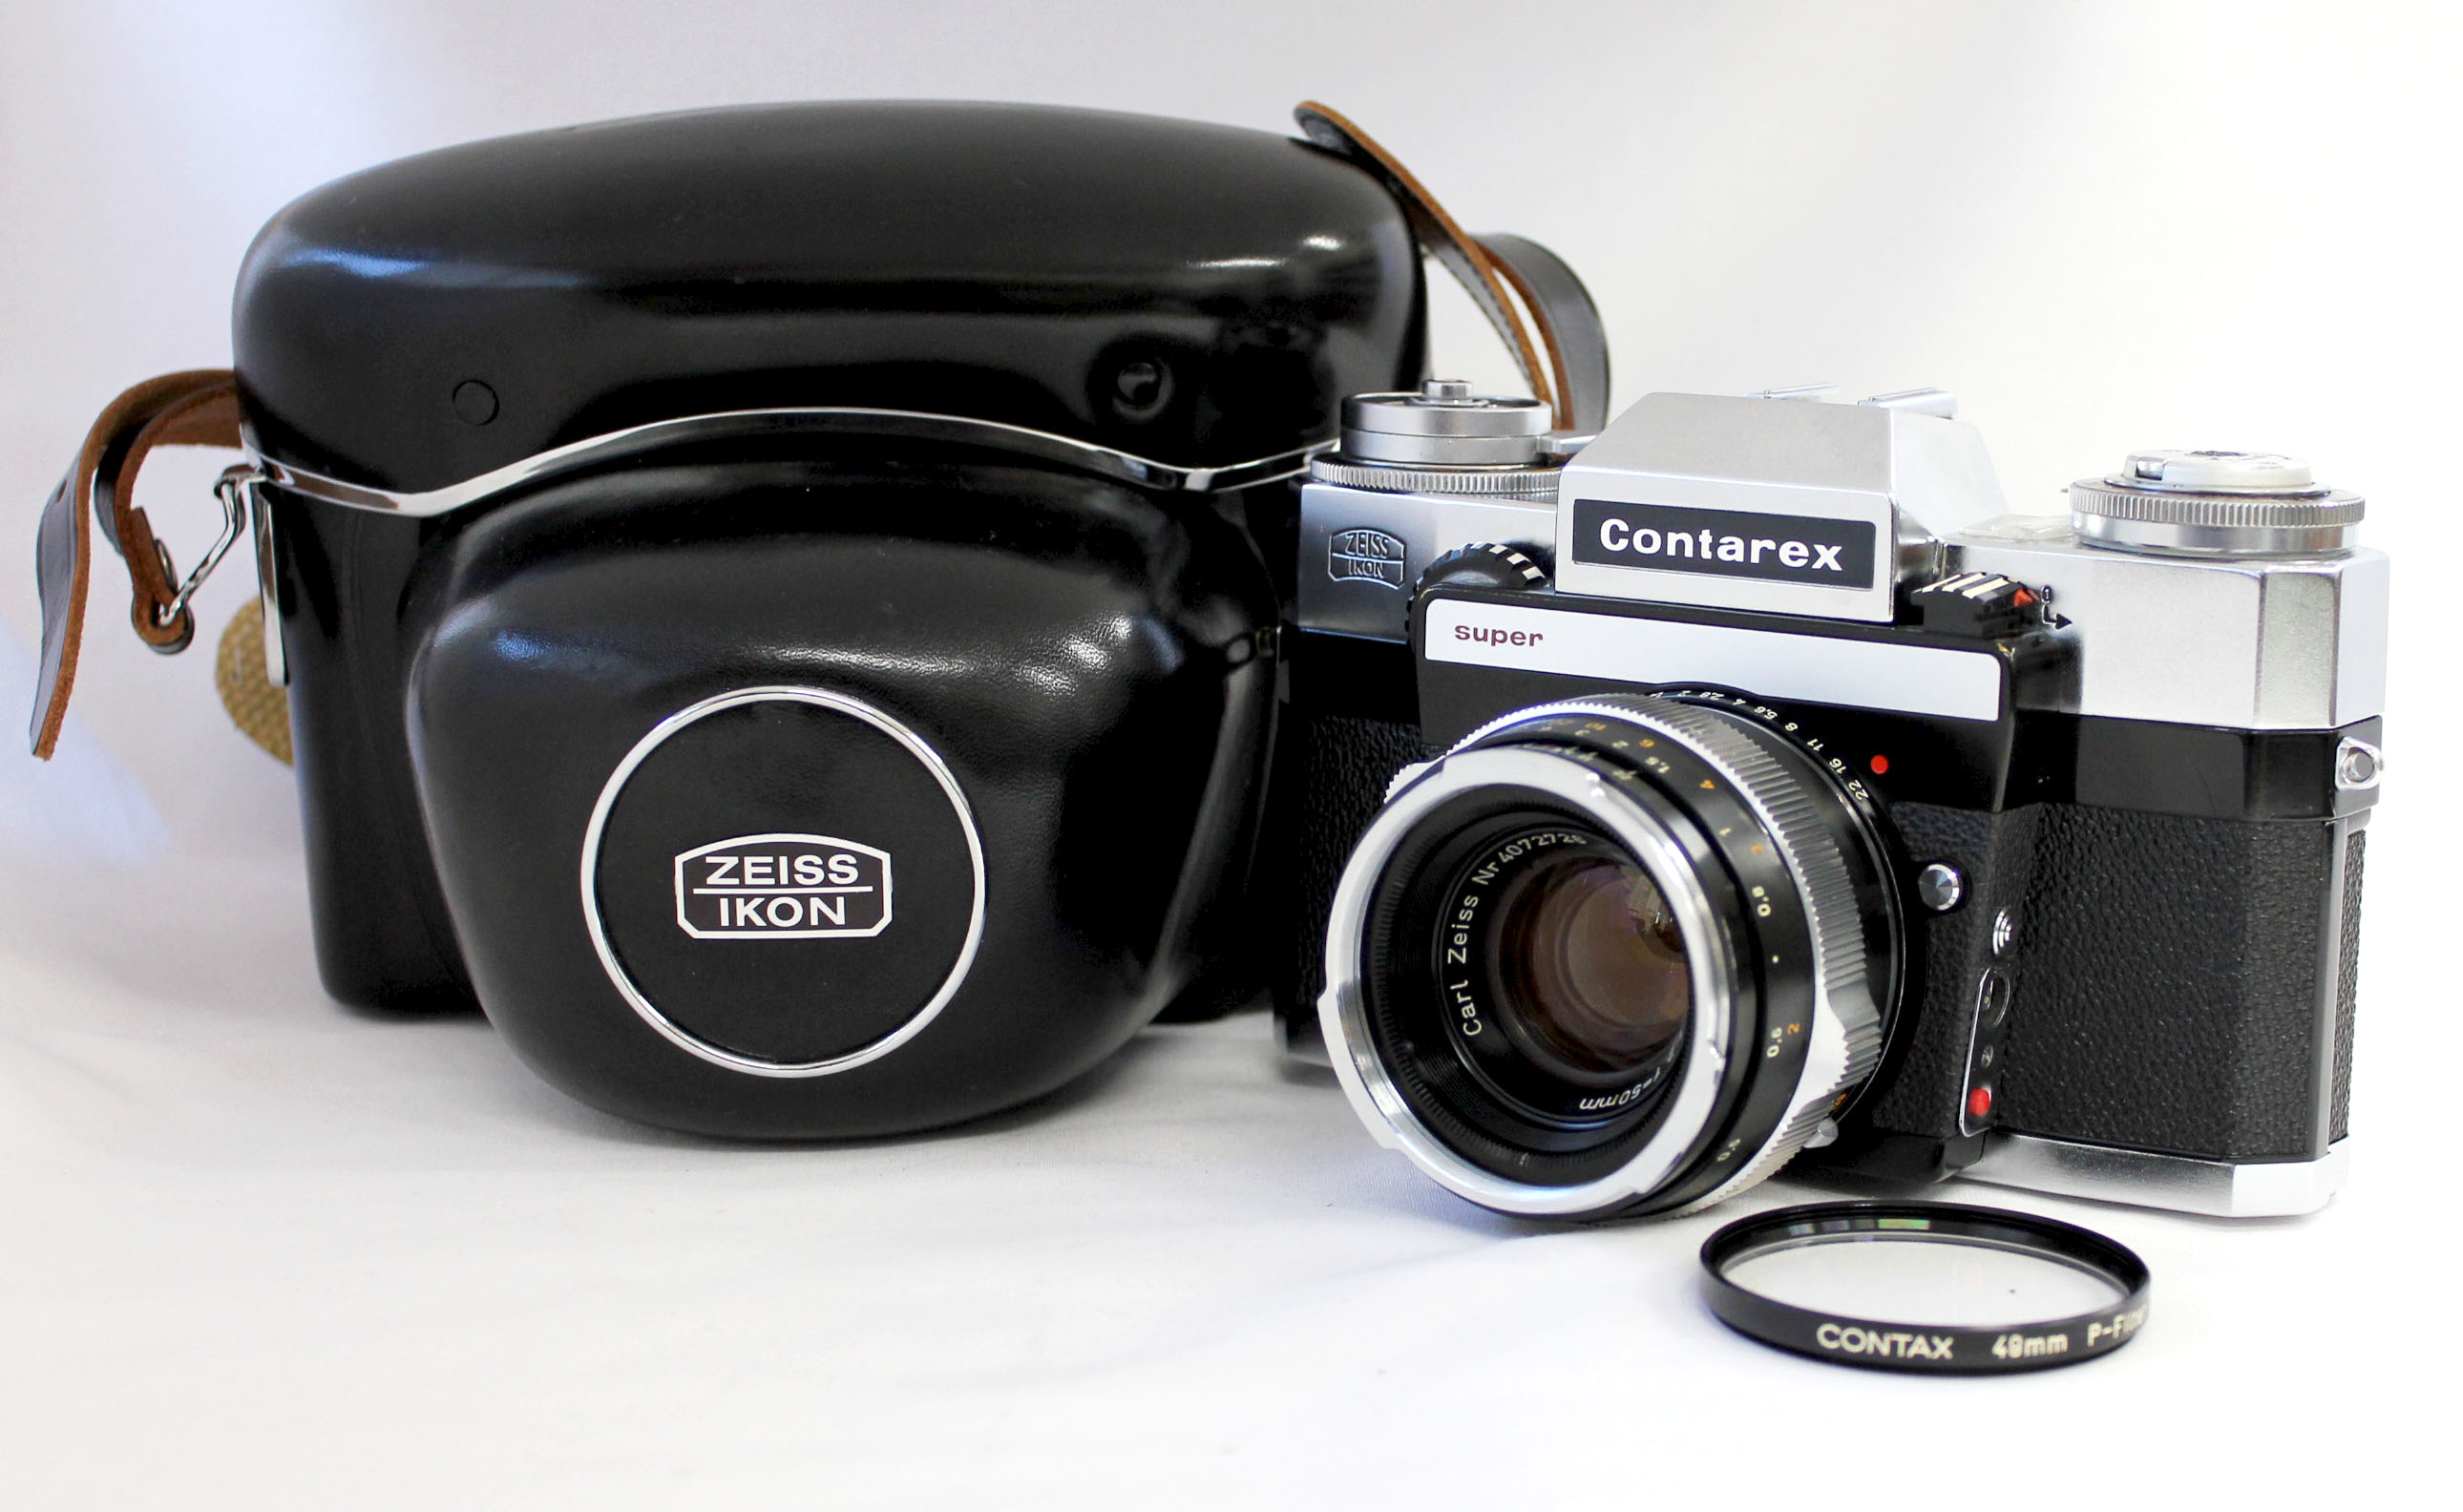 [Near Mint] Zeiss Ikon Contarex Super Silver Chrome 35mm SLR Film Camera with Planar 50mm F/2 & Case/Strap from Japan